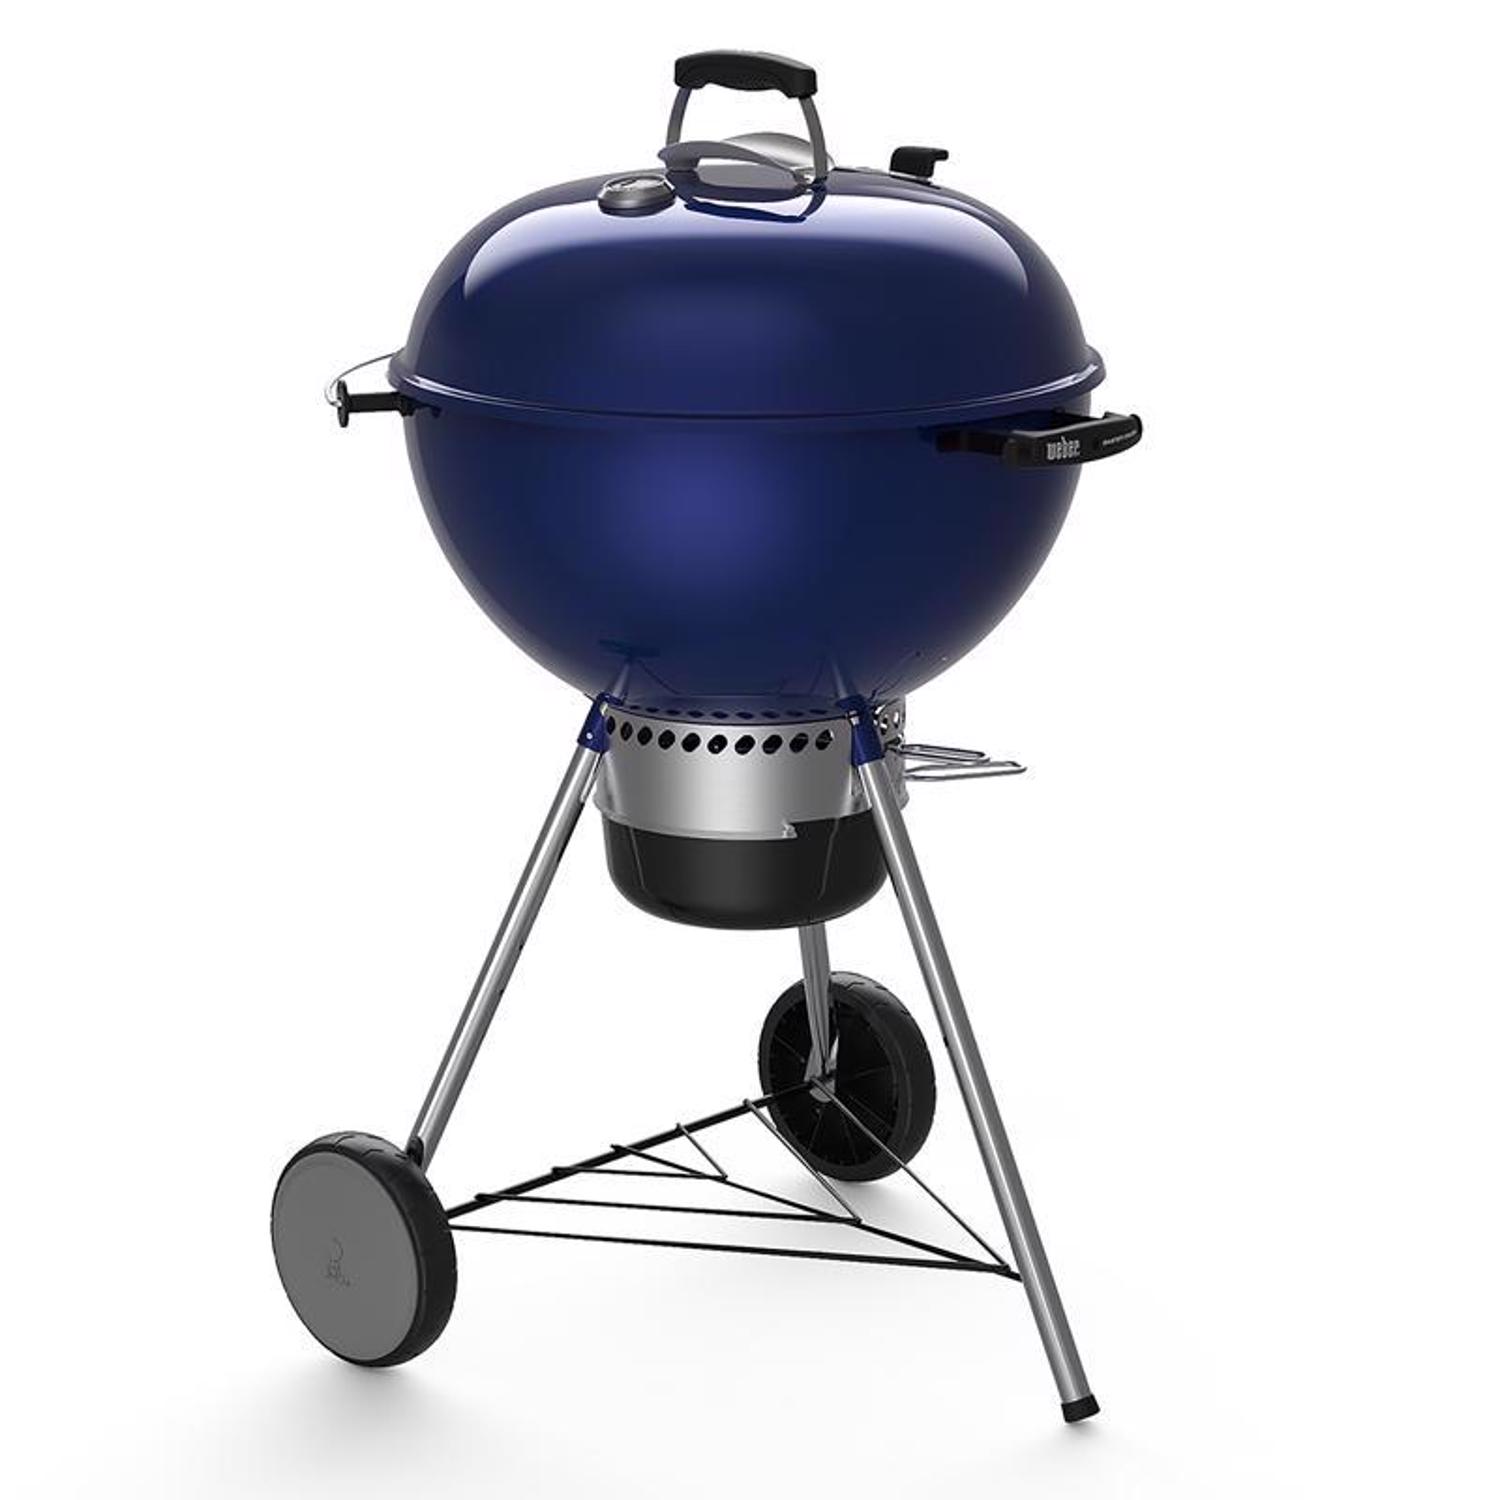 Weber 22 in. Performer Charcoal Grill Black - Ace Hardware